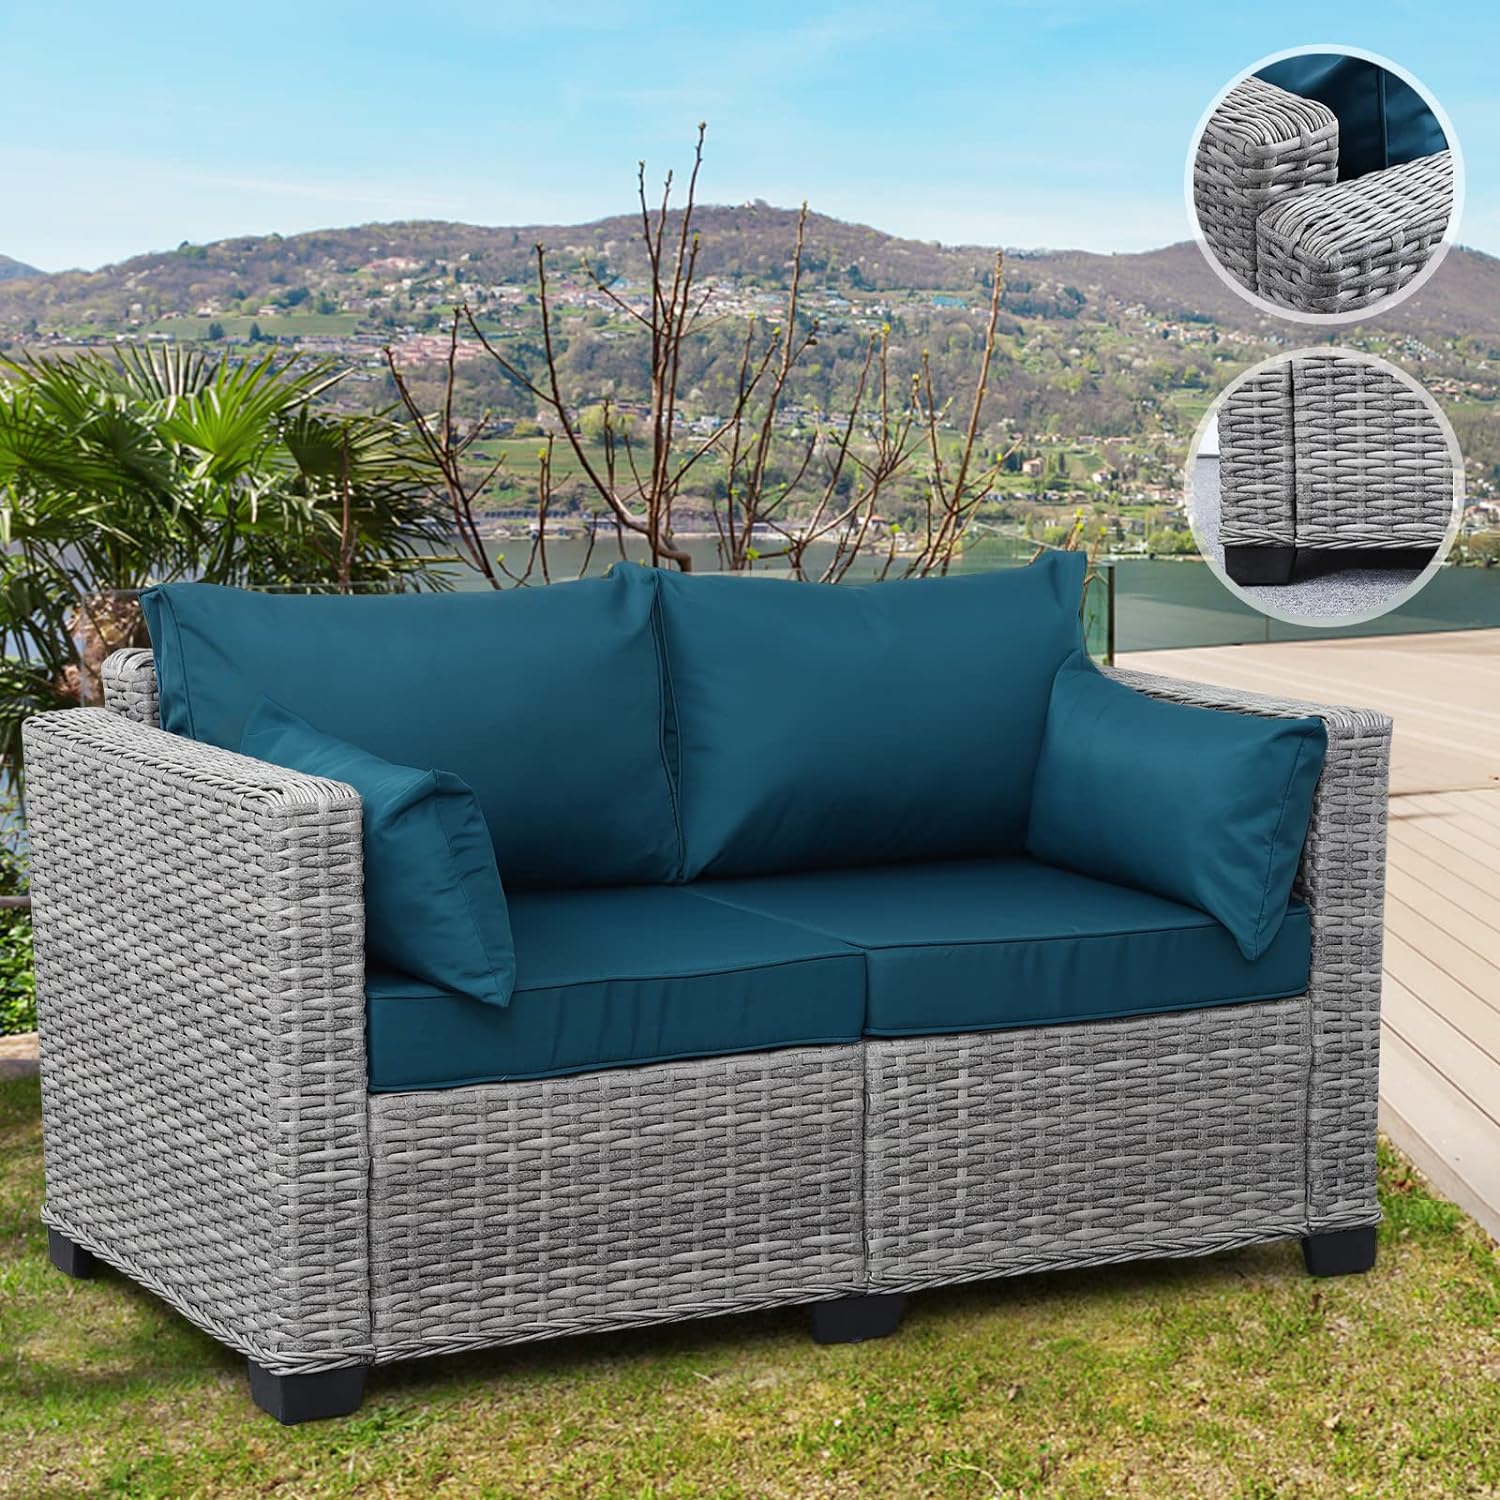 Rattaner Outdoor Furniture Loveseat Sofa Balcony Furniture Outdoor Loveseat 2 Seater Couch Small Sofa with Anti-Slip Outdoor Cushion Lumbar Pillow and Furniture Cover, Peacock Blue